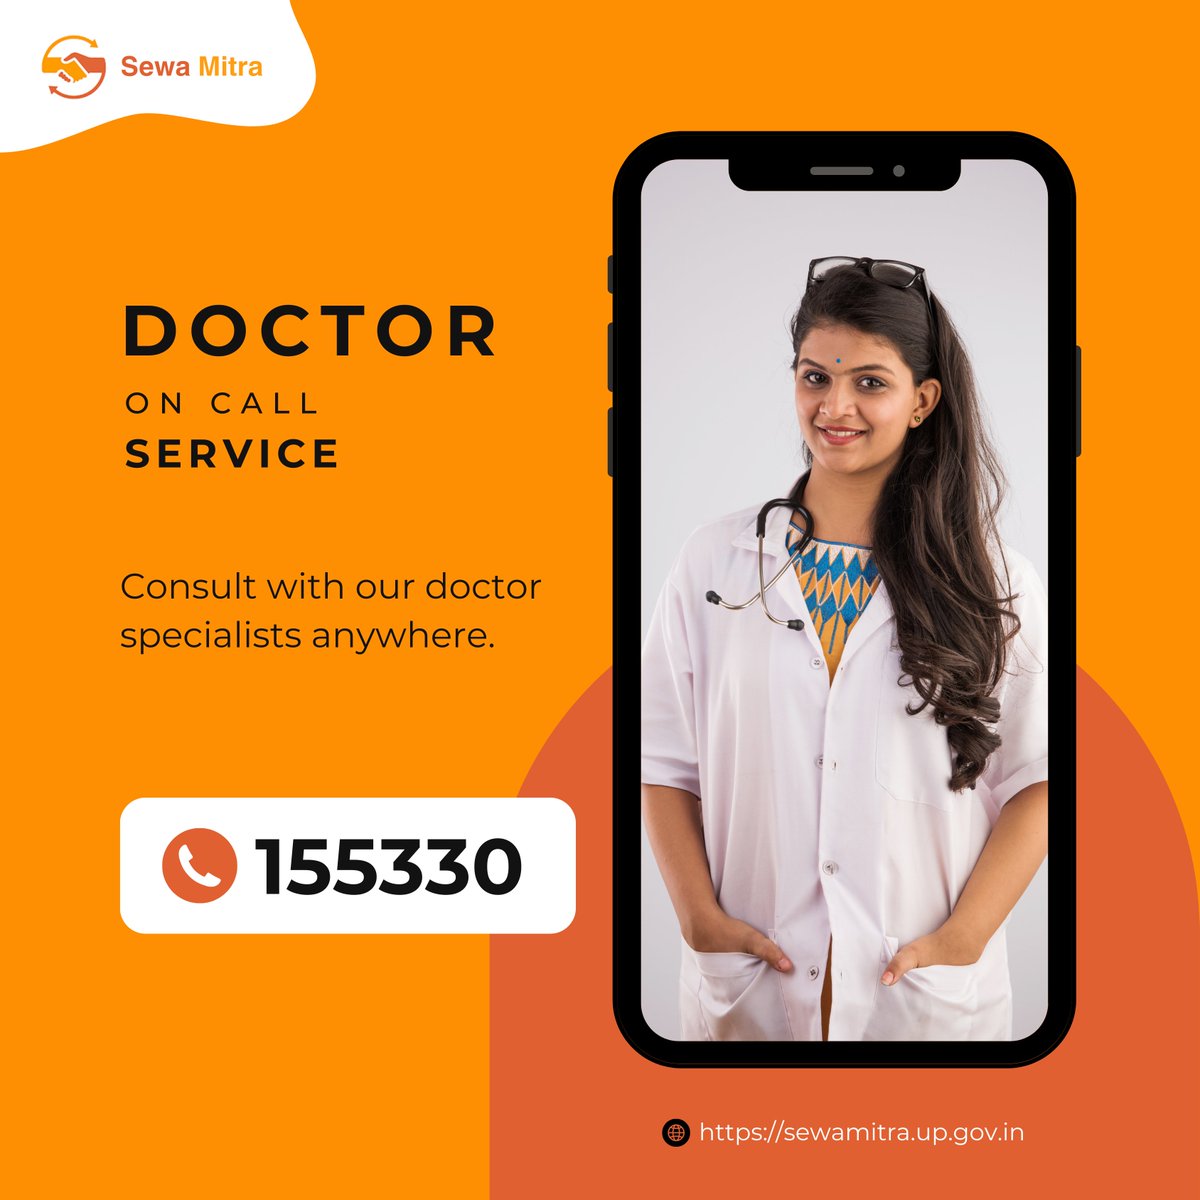 Consult with our doctor specialists anywhere. Just Call at 155330 

#doctoroncall💊 #doctoroncall #doctoroncallservice #doctor #doctorconsult #doctorconsultation #doctorconsultationapp #doctorconsultationathome #sewamitra #IRCTC #TwitterX #RelieveStress #sewamitraapp